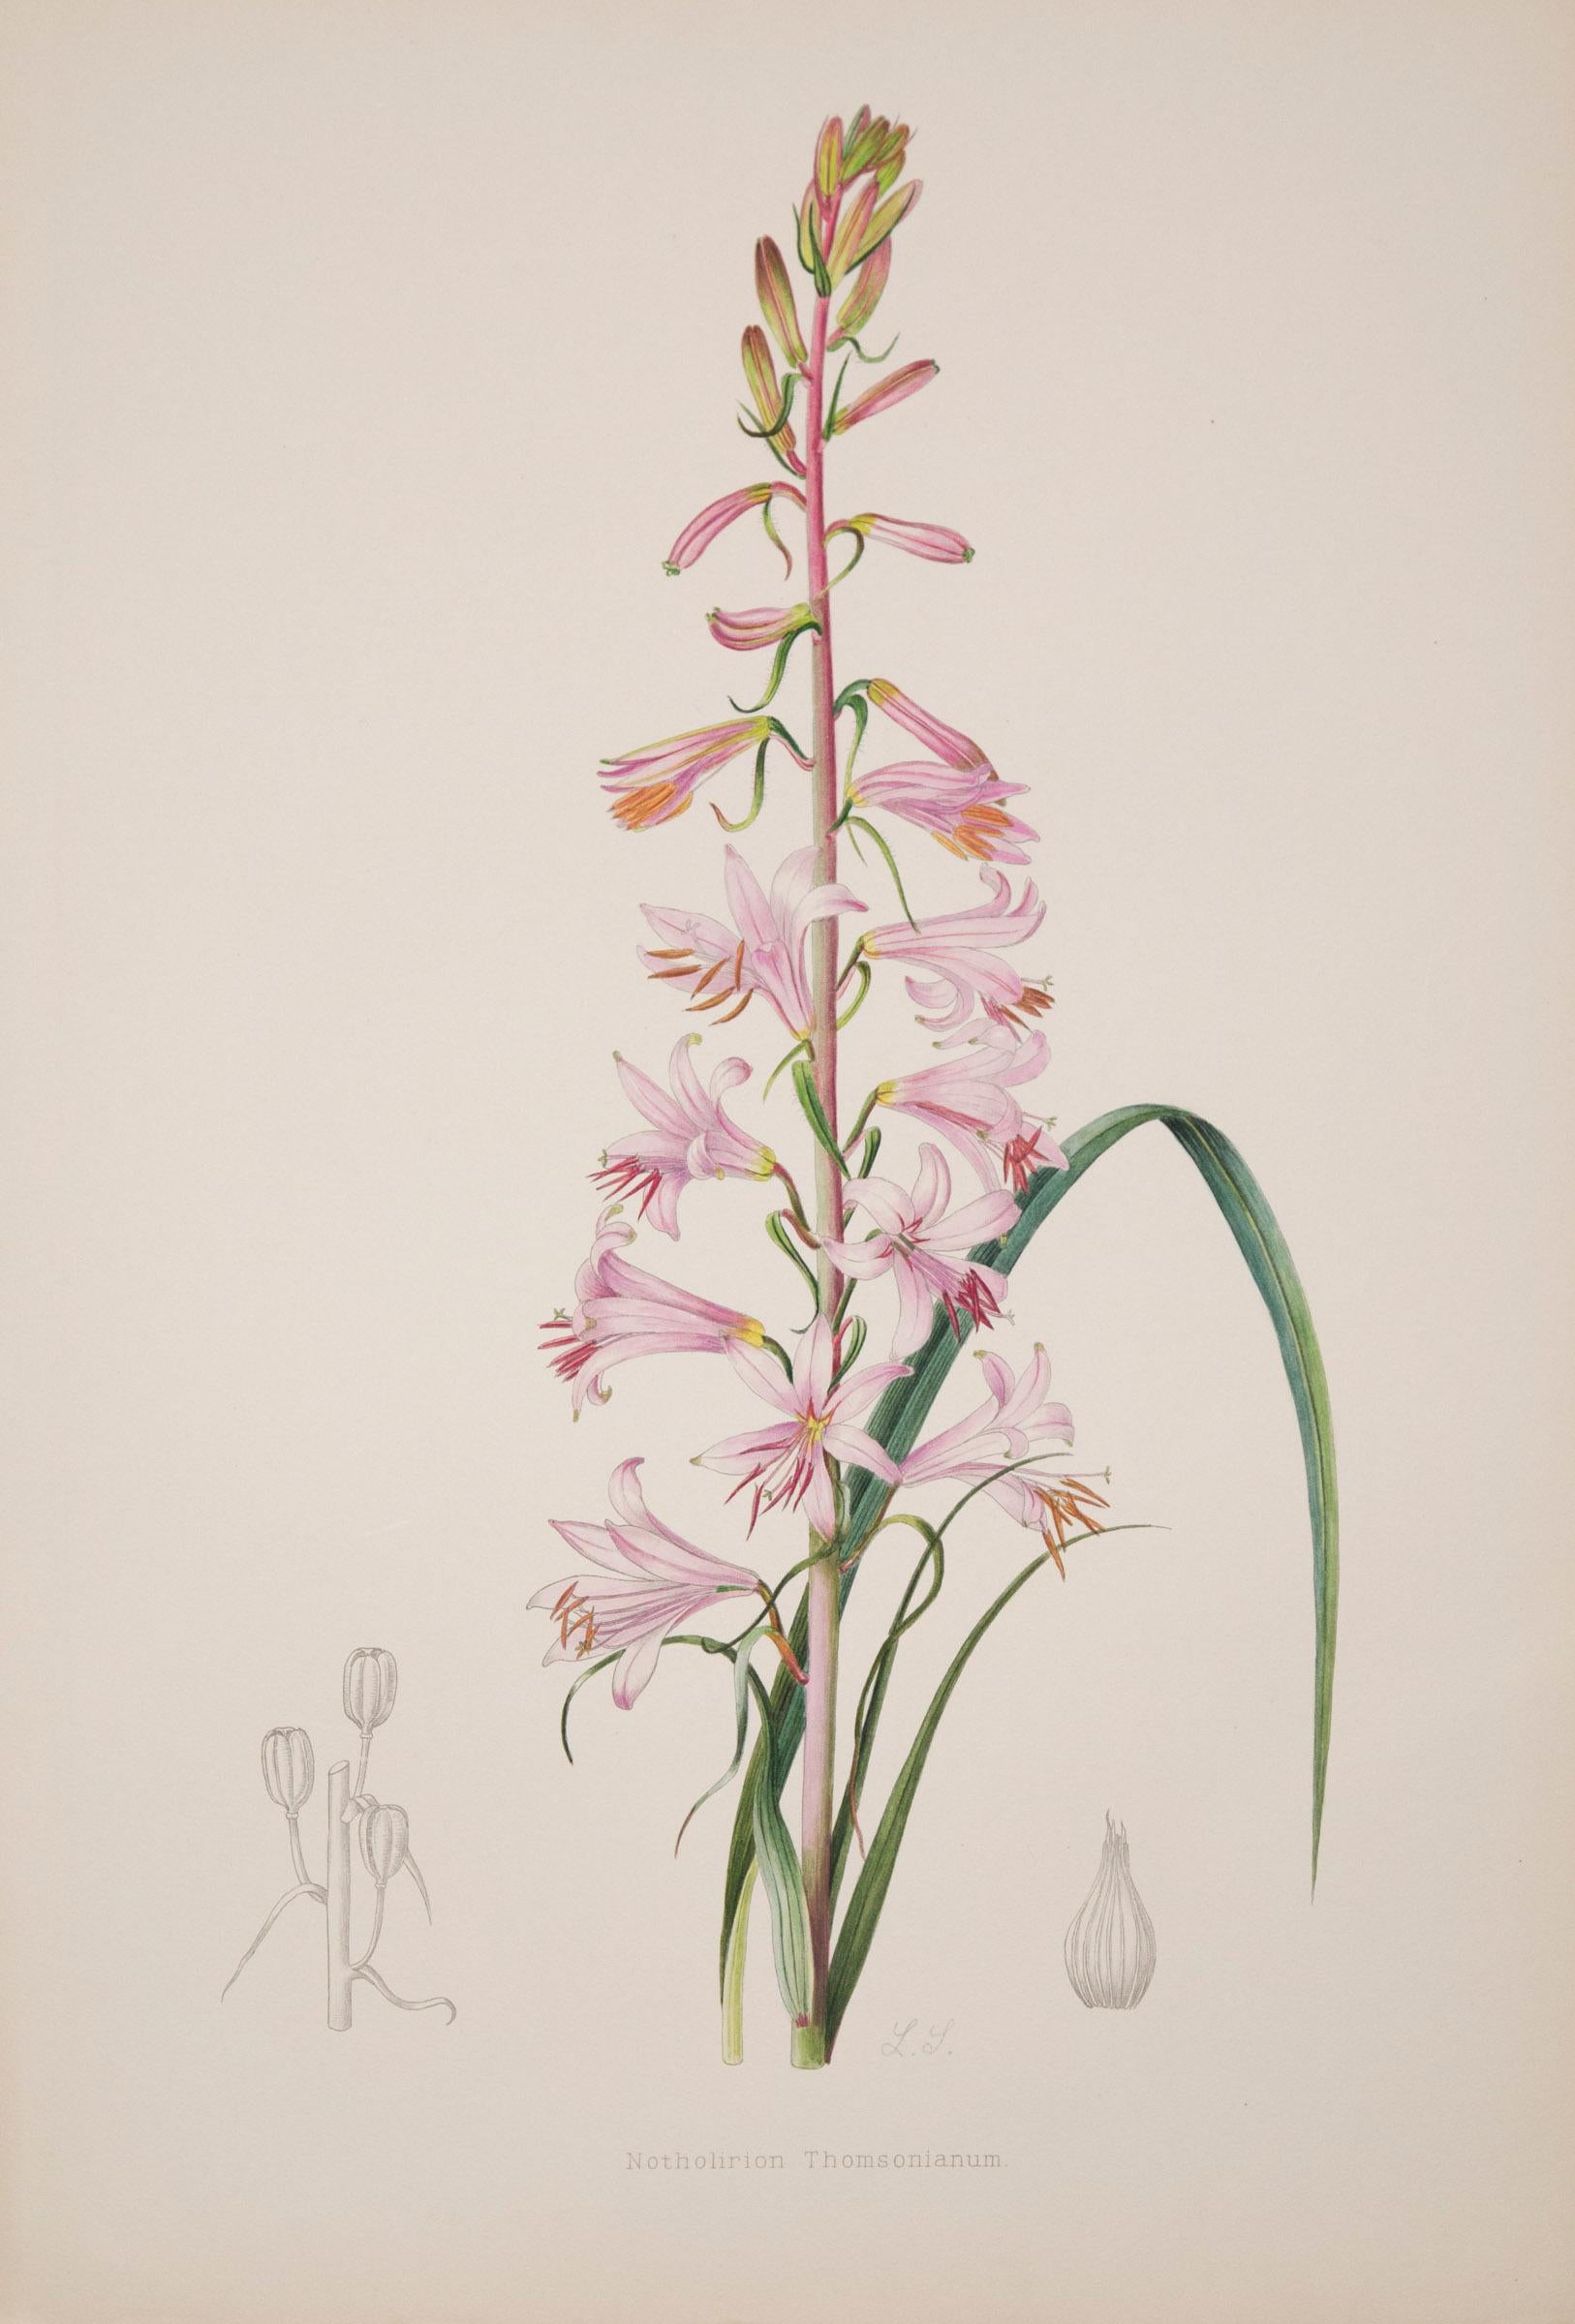 A set of six of exceptional quality lithographs with hand-coloring from A Supplement to Elwes' Monograph of the Genus Lilium, after Lillian Snelling, 1933-40, on wove papers, published by A. Grove, and A.D. Cotton, London

Why we like